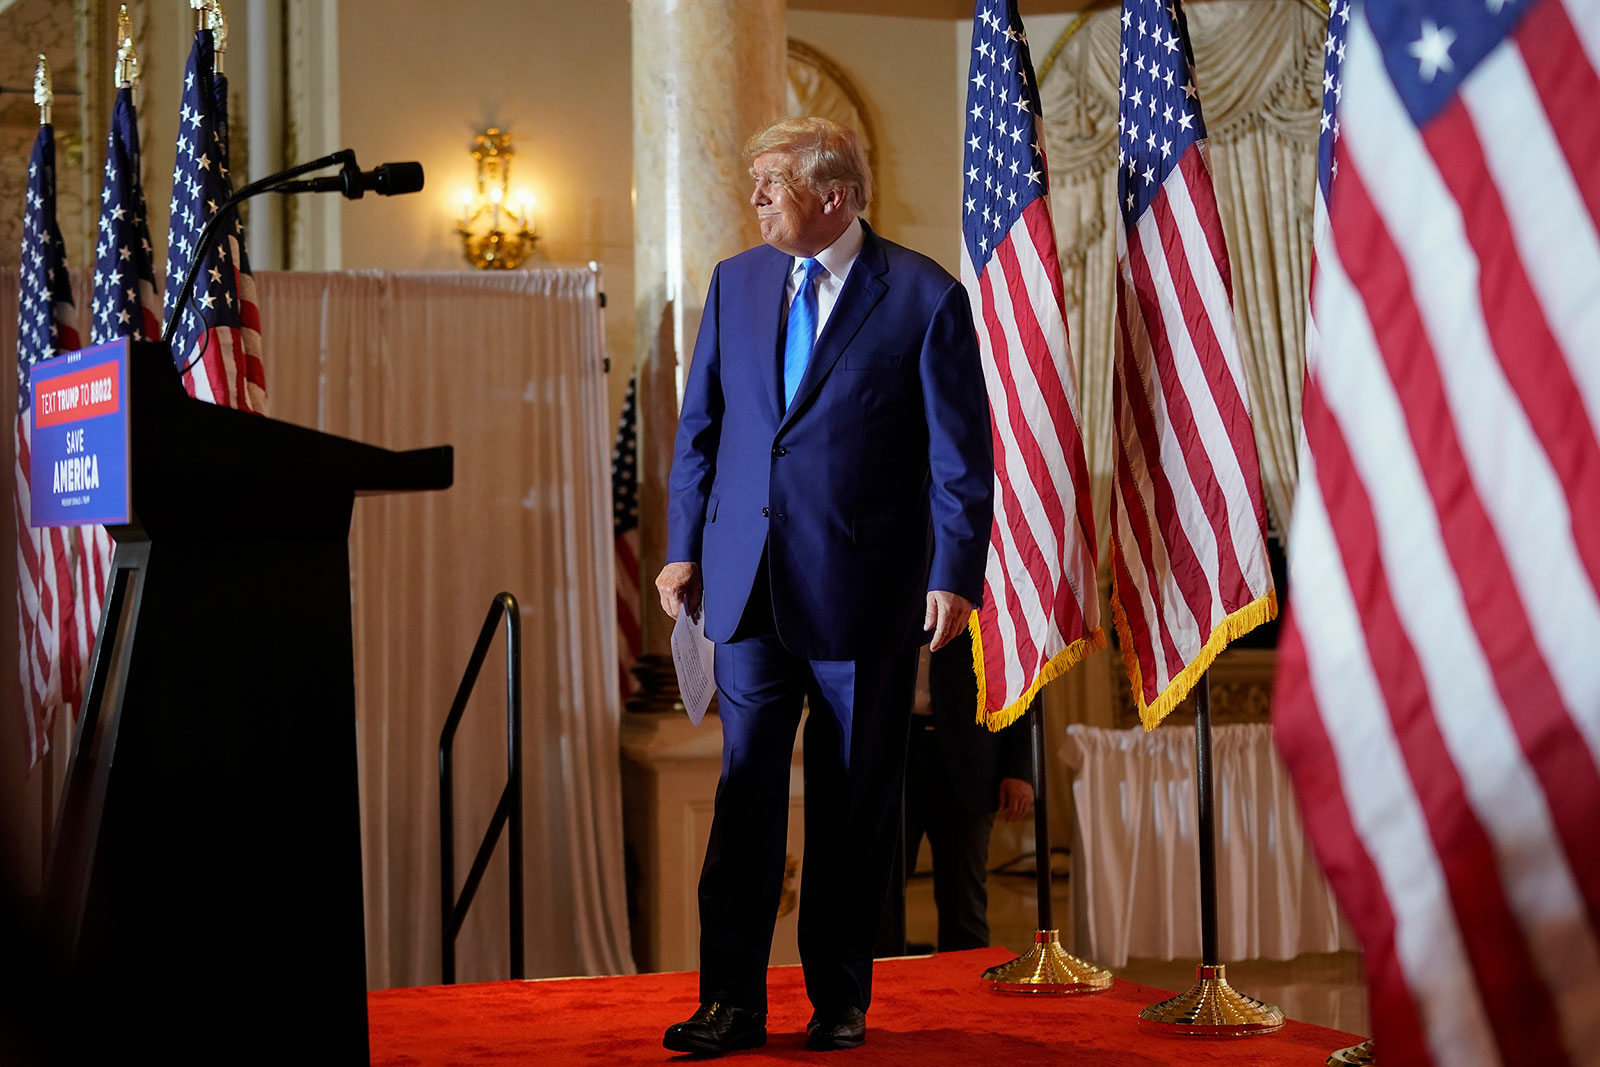 Former president Donald Trump arrives to speak at Mar-a-lago on November 8, in Palm Beach, Florida.